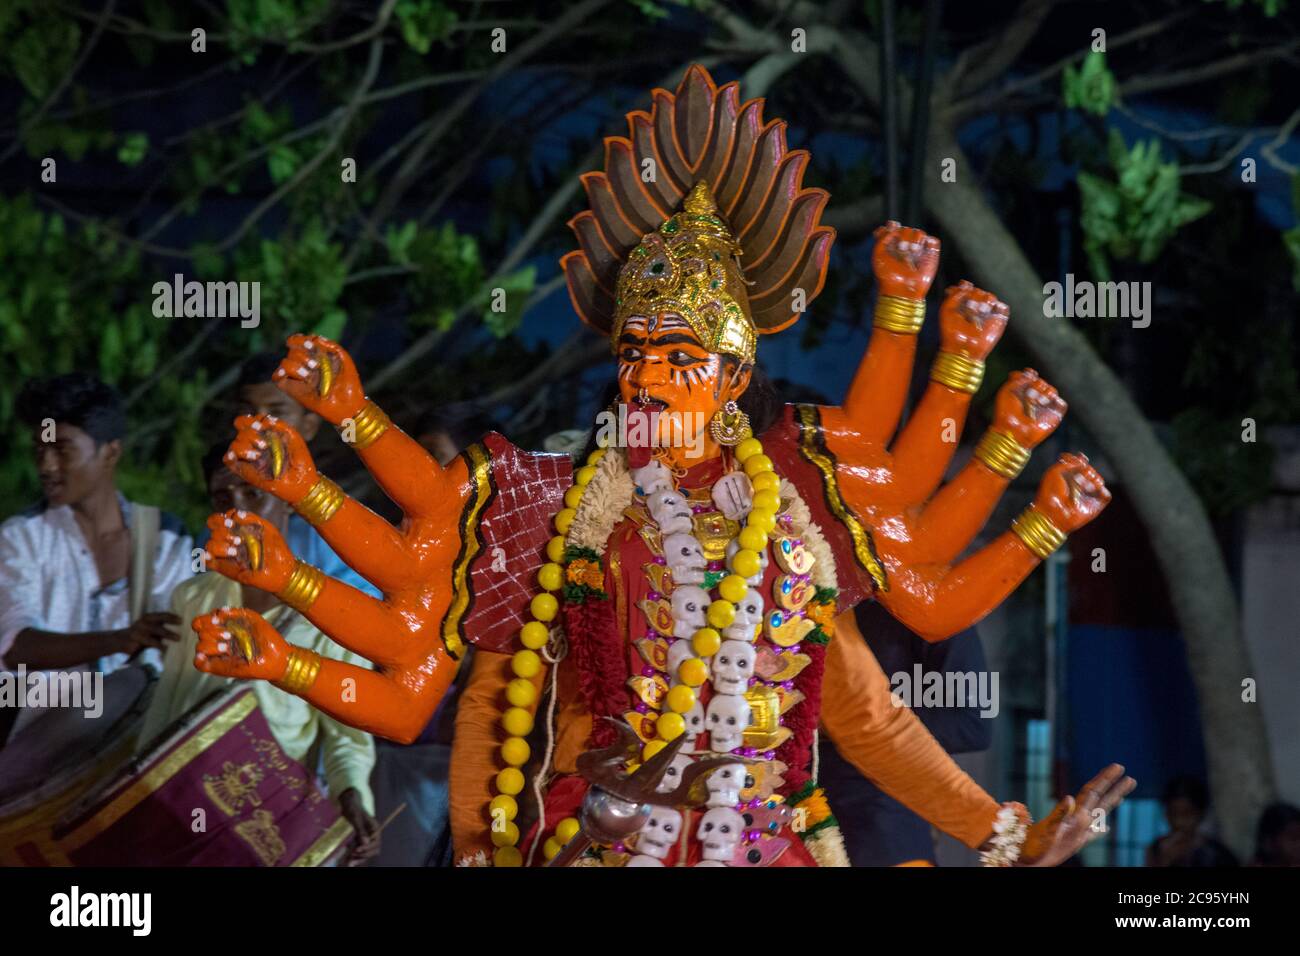 Indian Ethnic theatrical performance during an ethnic festival in Jerusalem, Israel Stock Photo